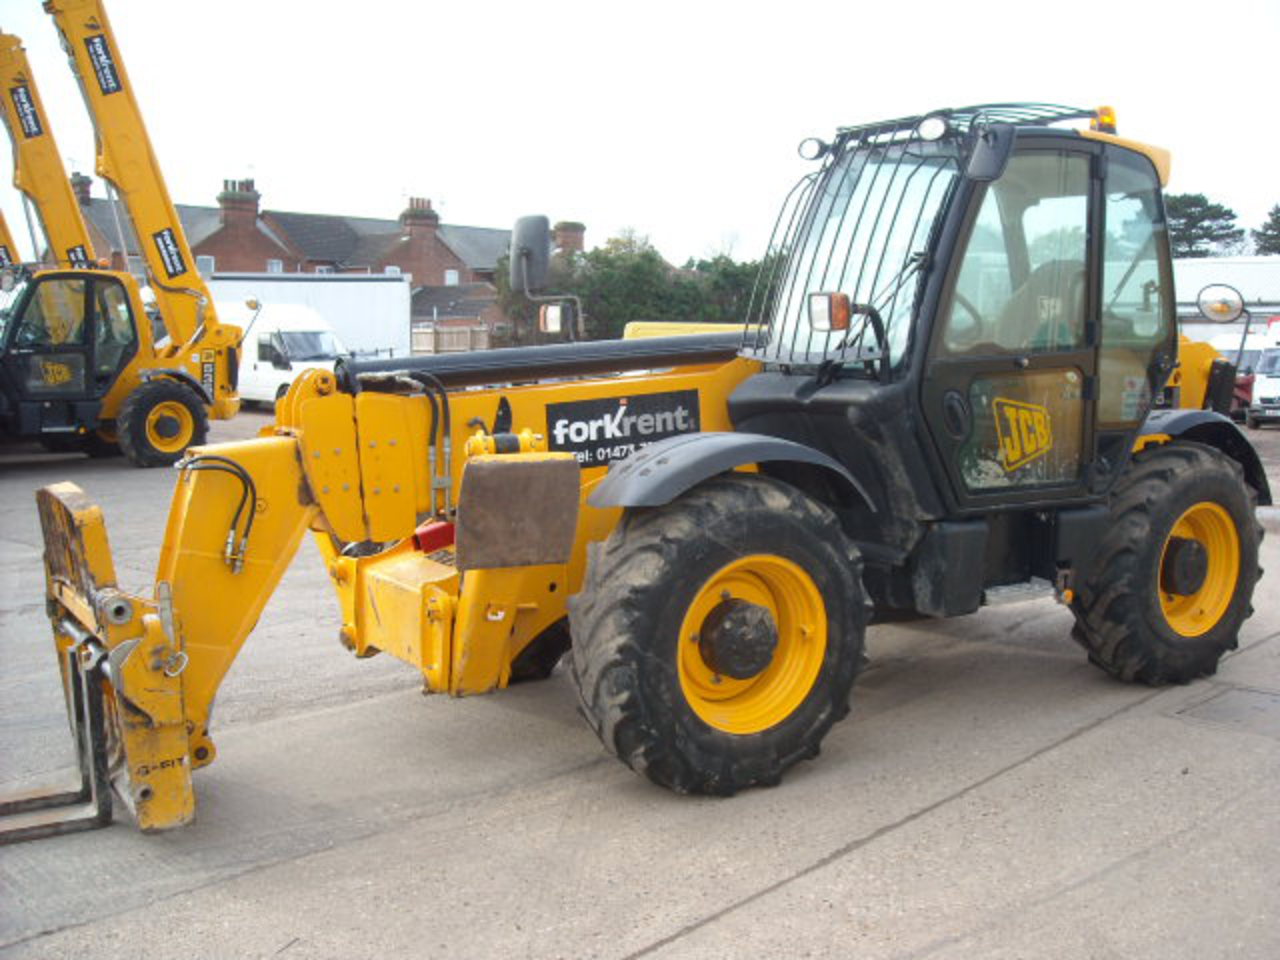 JCB Loadall 535 140: Photo gallery, complete information about ...